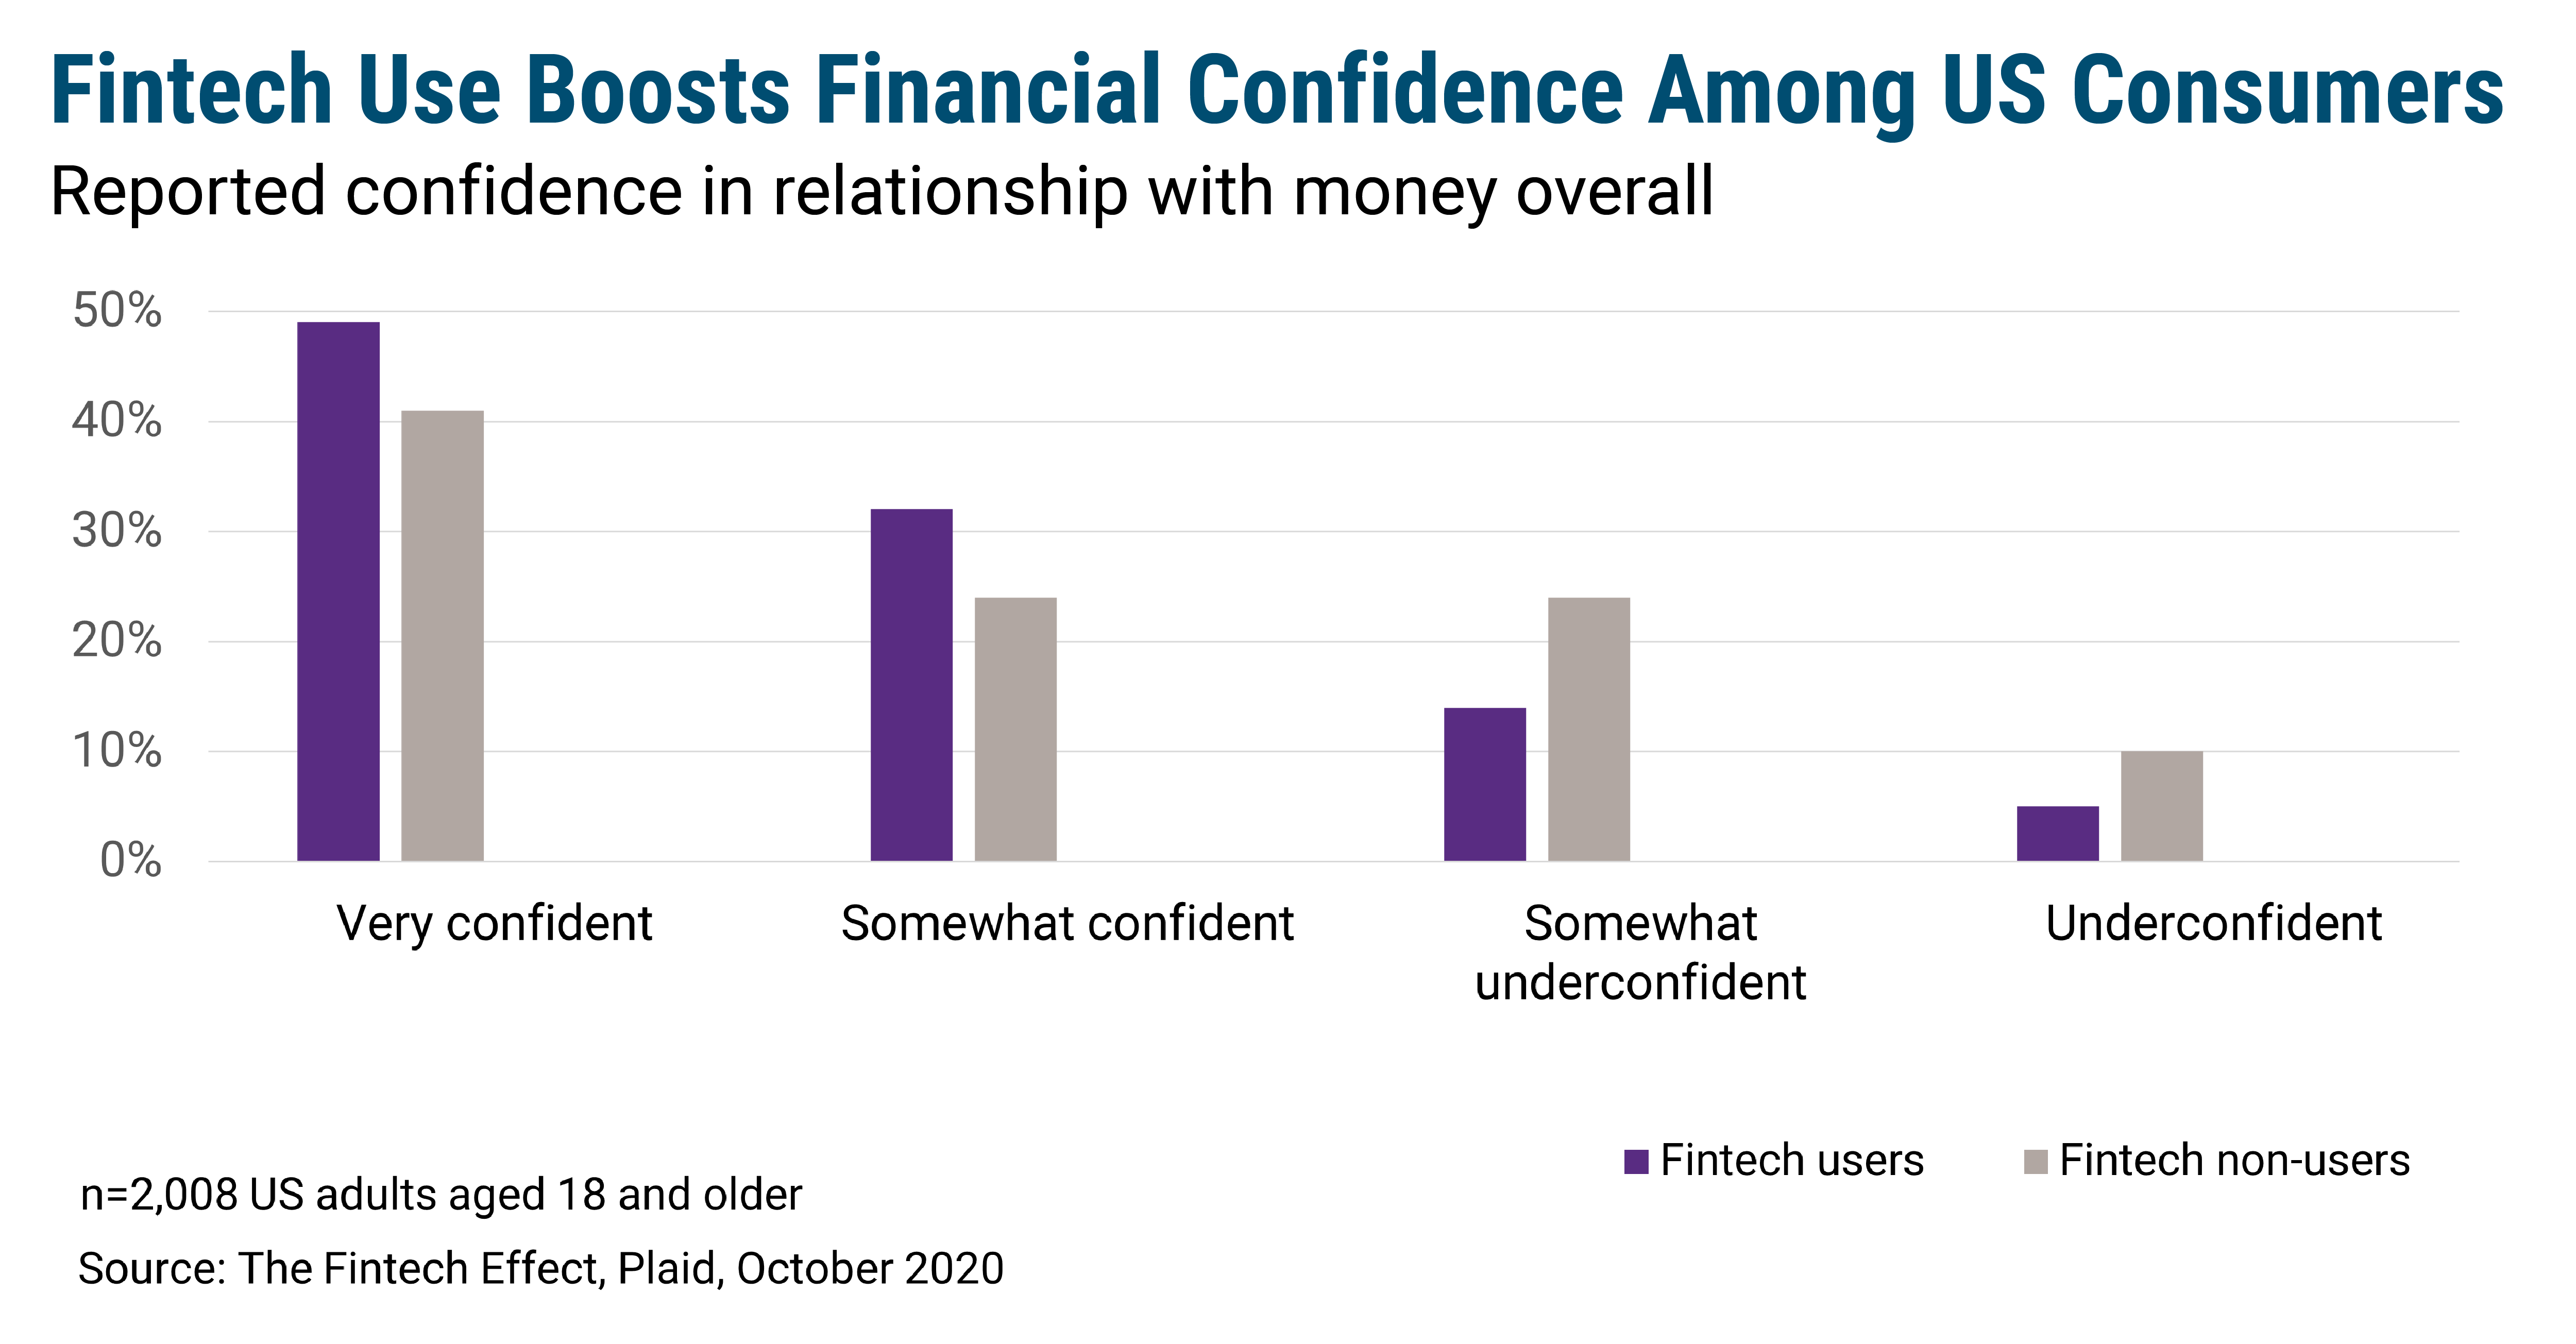 Fintech Use Boosts Financial Confidence Among US Consumers